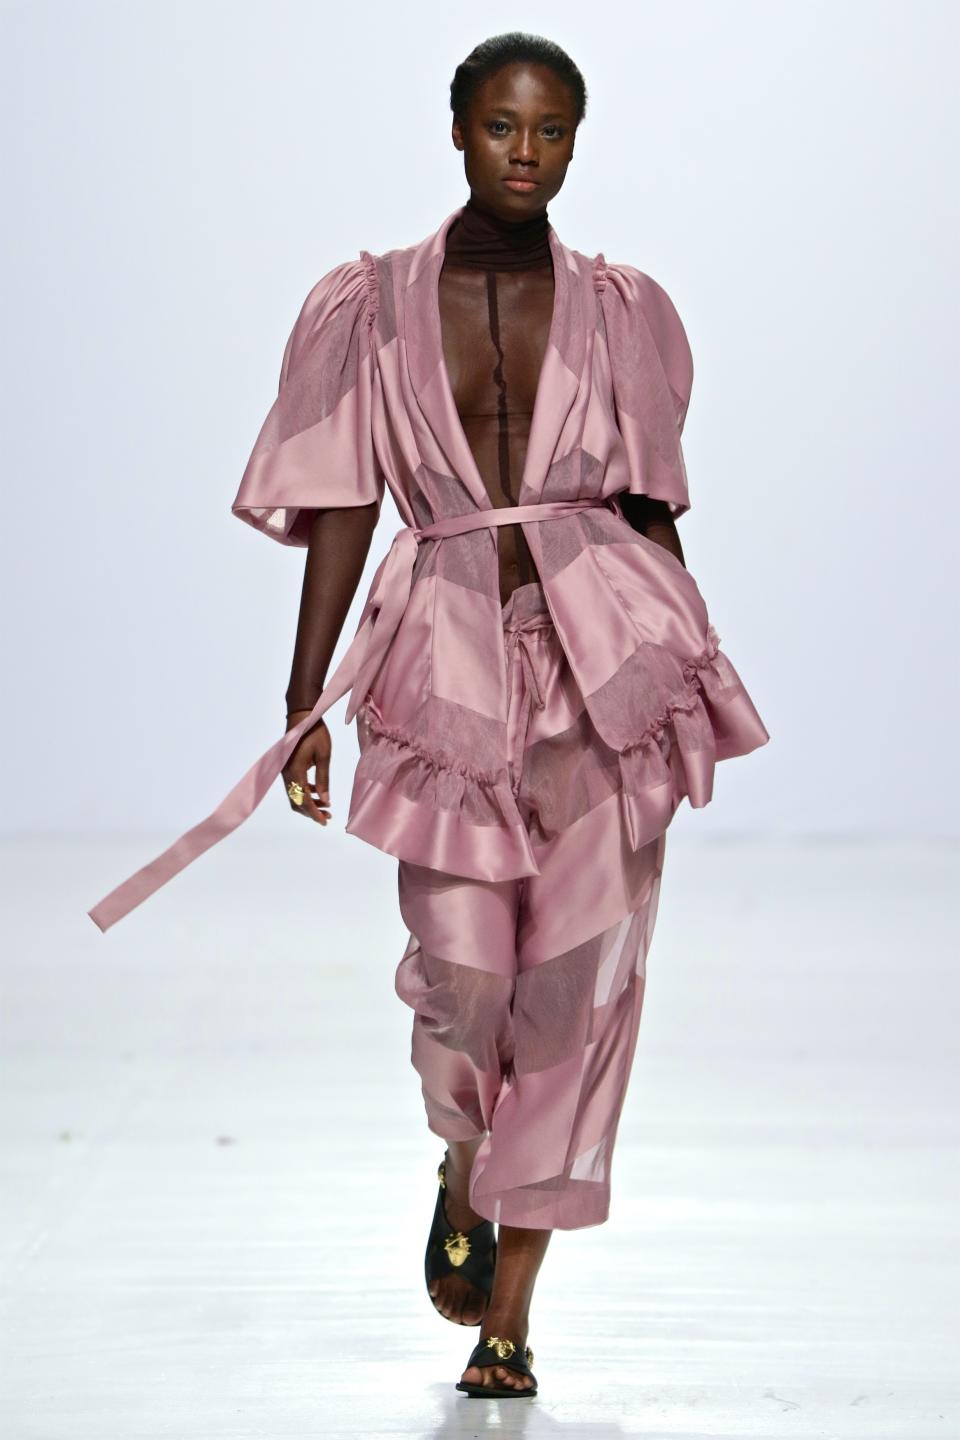 A look from Loza Maleombho during Lagos Fashion Week. - Credit: SDR Photo